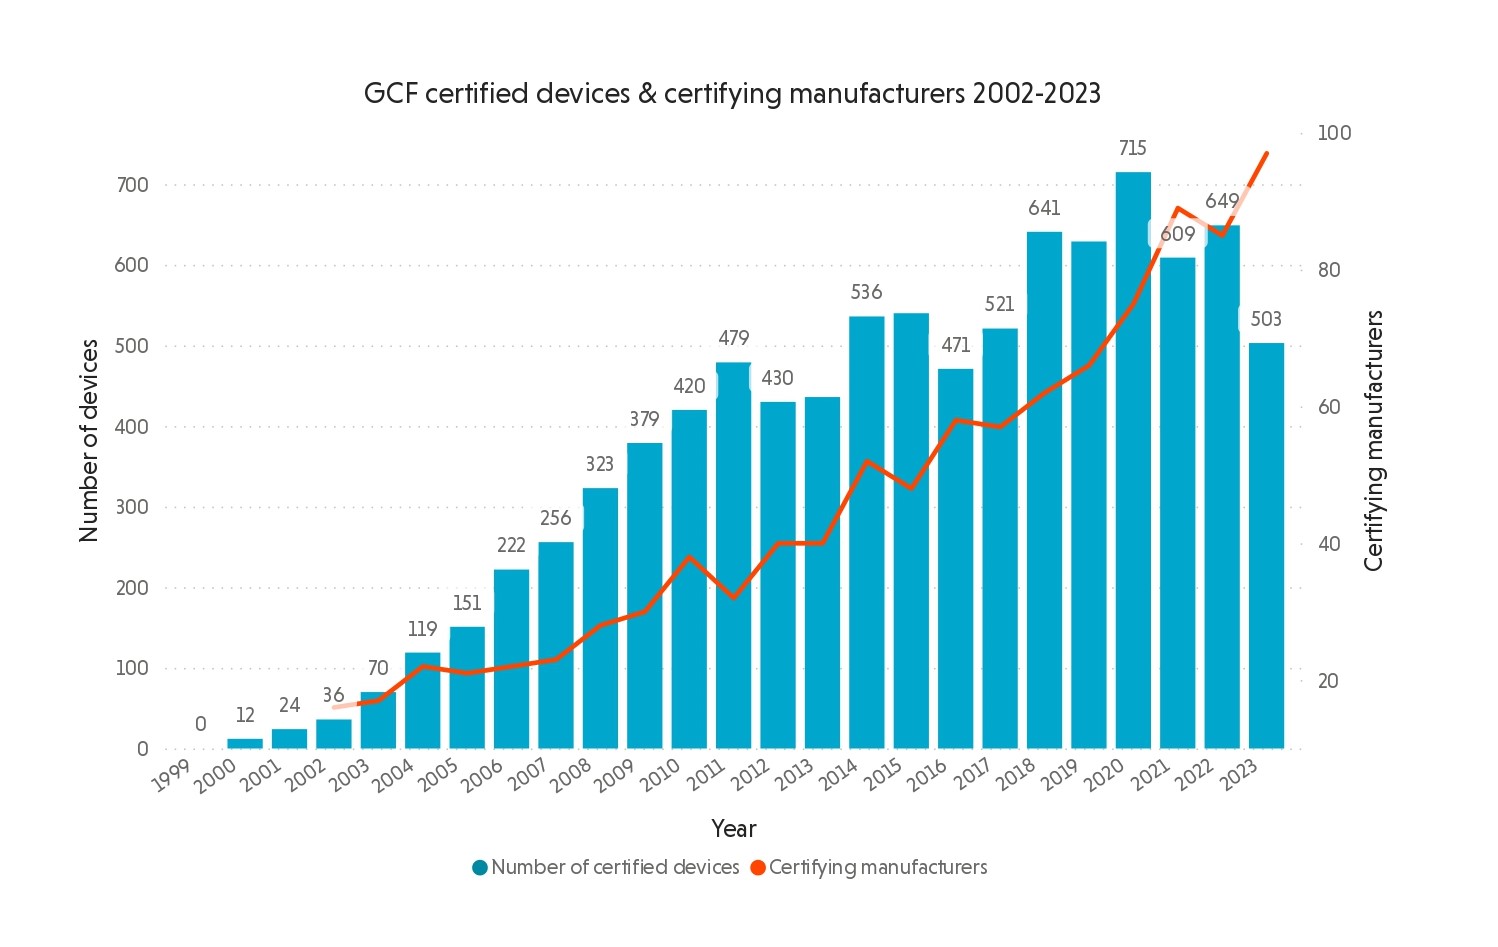 GCF certified devices & certifying manufacturers 2002-2023